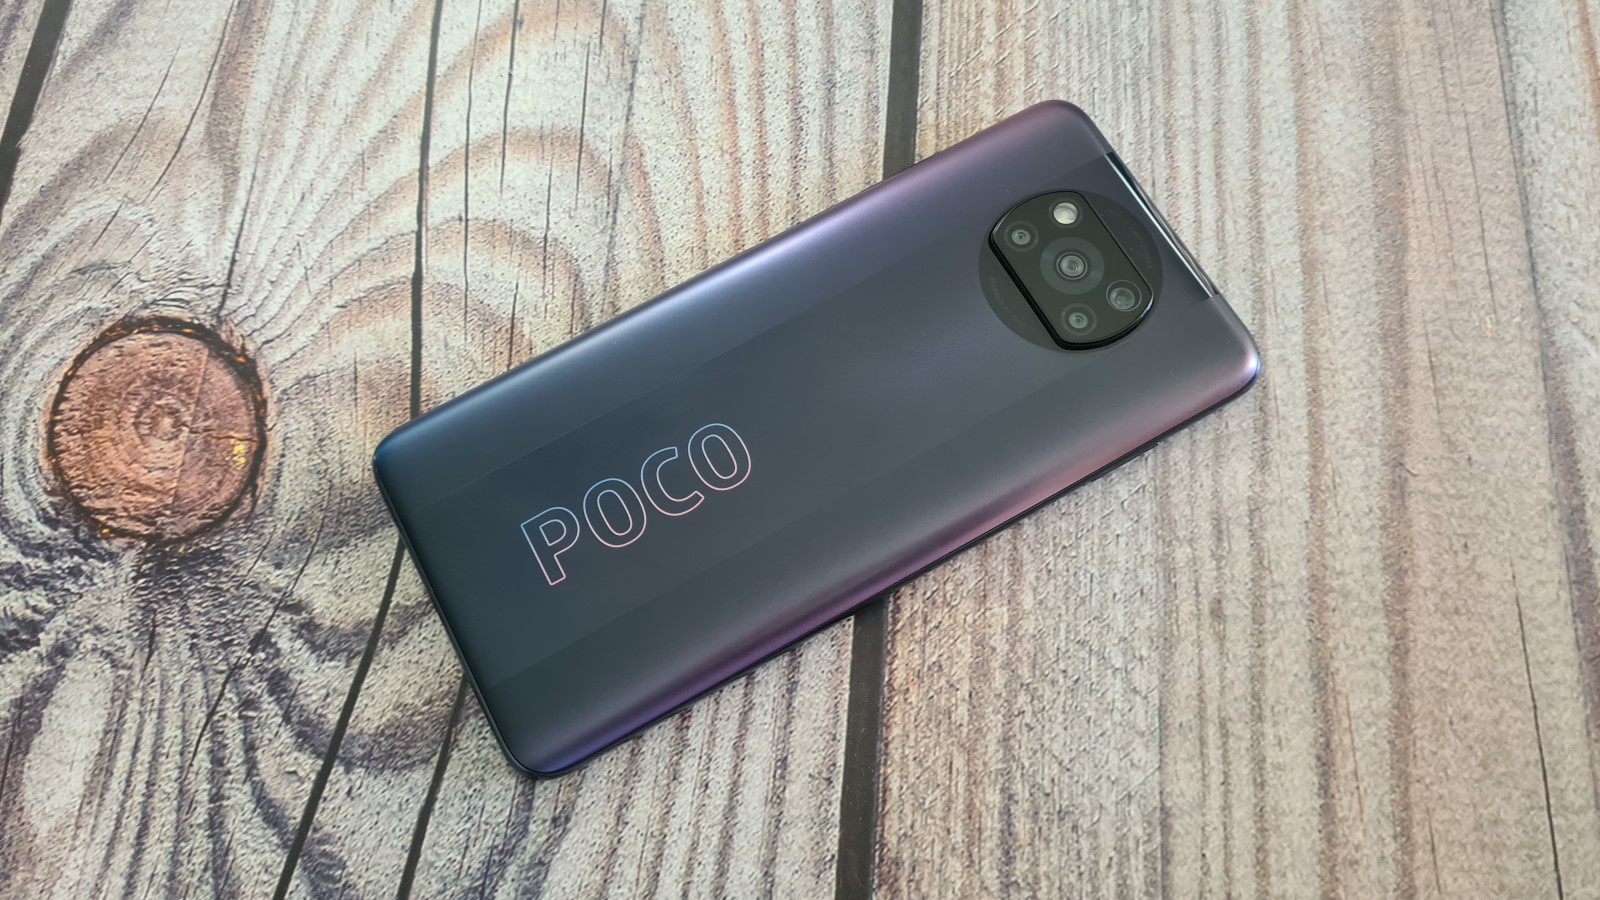 Xiaomi Poco X3 NFC review: A smartphone that punches above its budget price